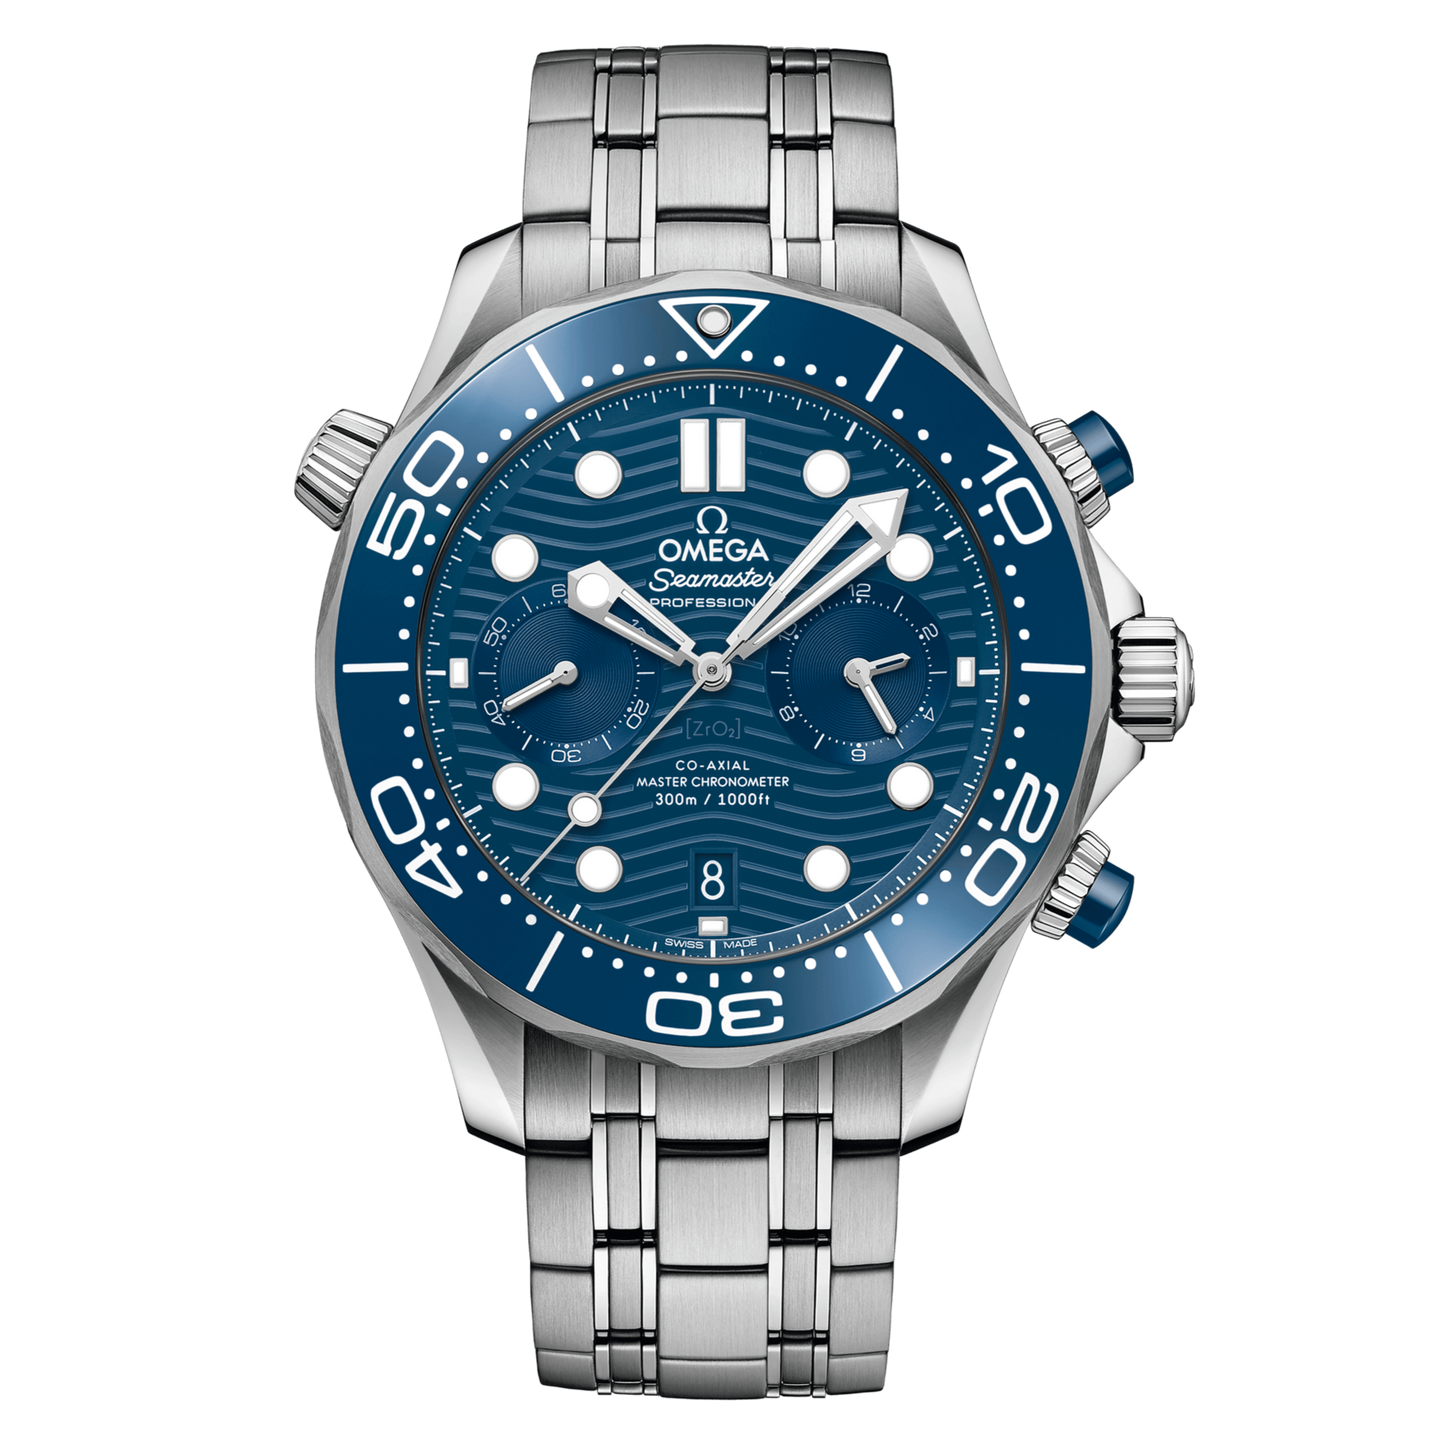 OMEGA Seamaster Diver 300m Co-Axial Master Chronometer Chronograph 44mm, Steel and Blue